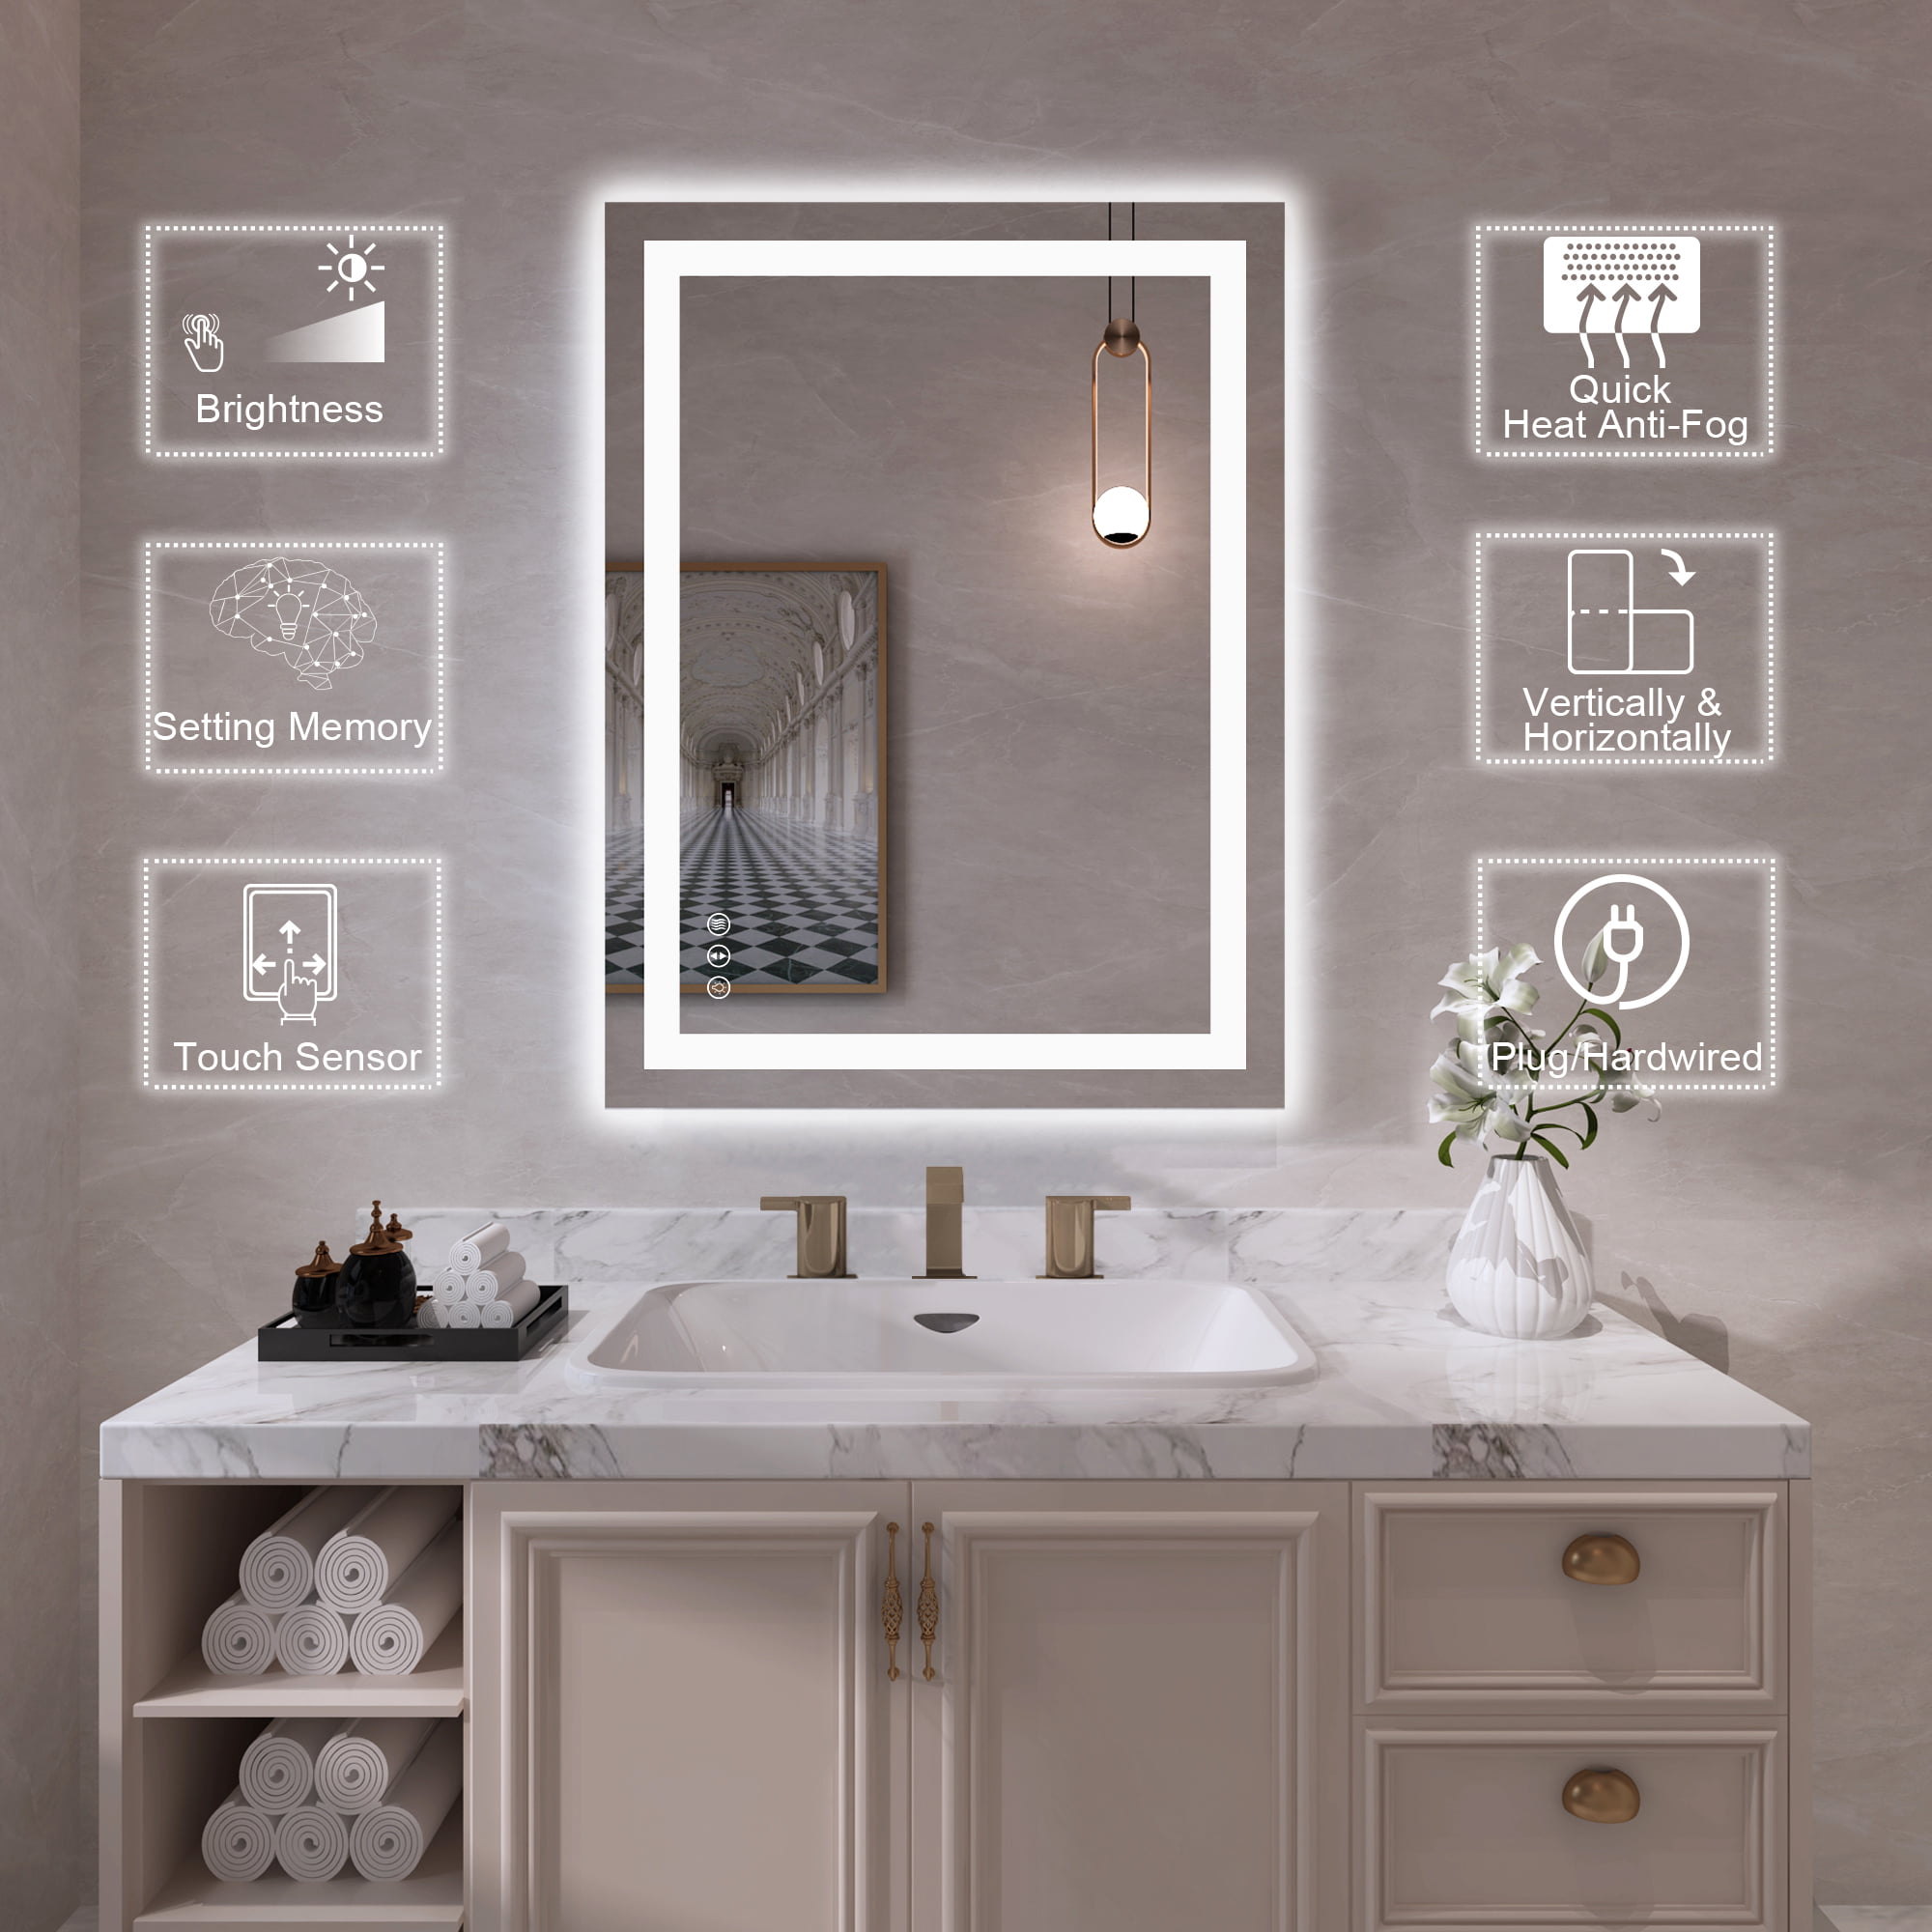 ANTEN 32x24 inch LED Lighted Bathroom Mirror, Wall Mounted Bathroom Vanity  Mirror, Dimmable Touch Switch Control, 3000-6000K Adjustable Warm